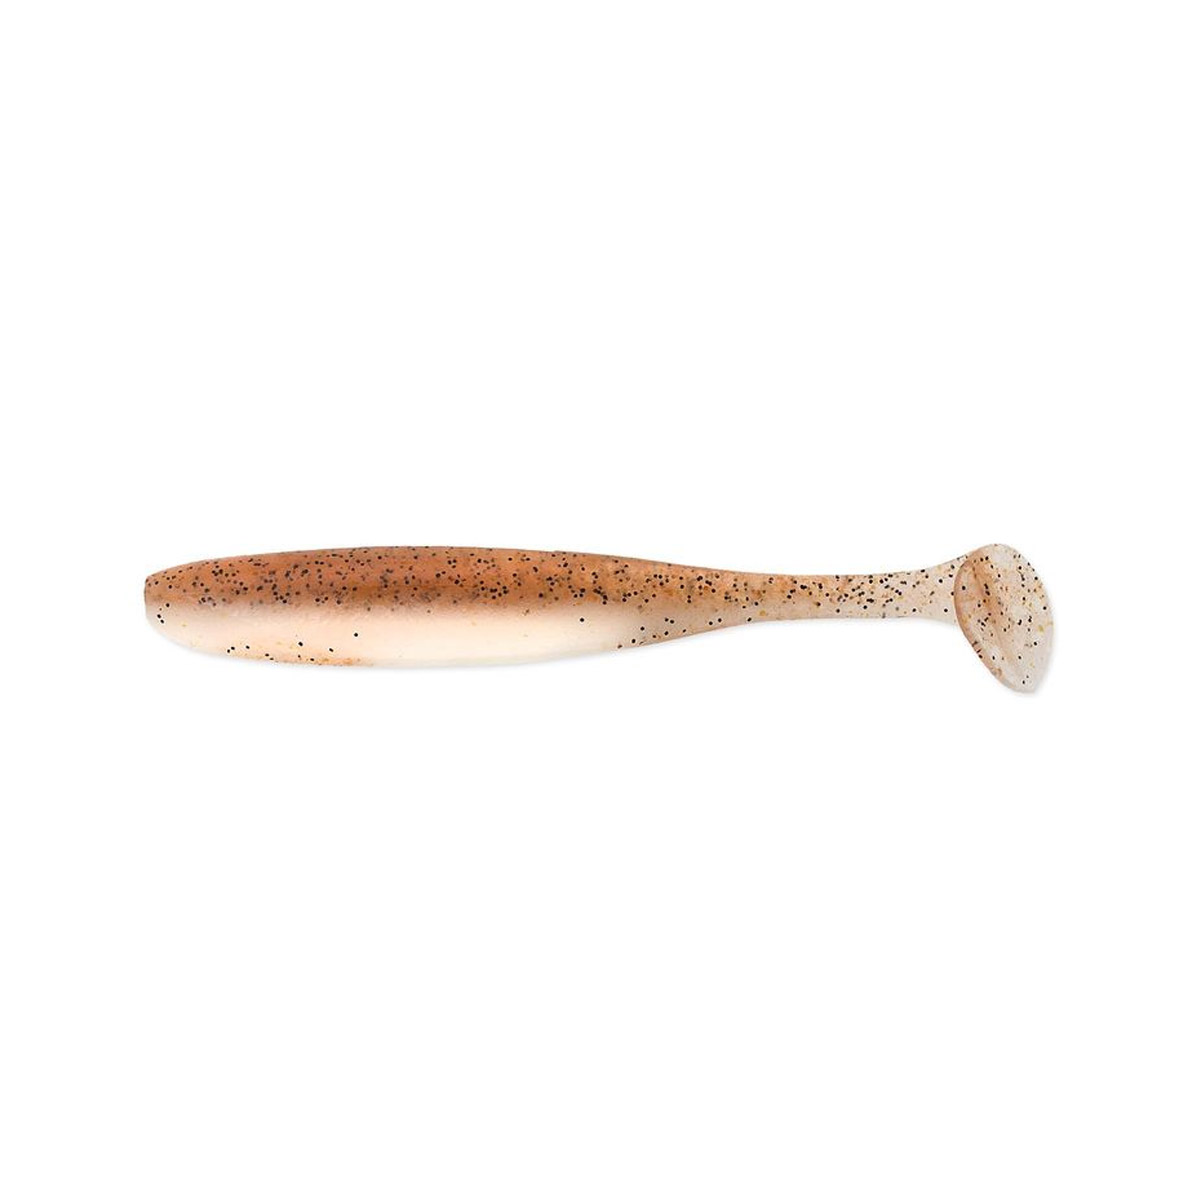 Keitech Easy Shiner 4 inch -  Natural Craw